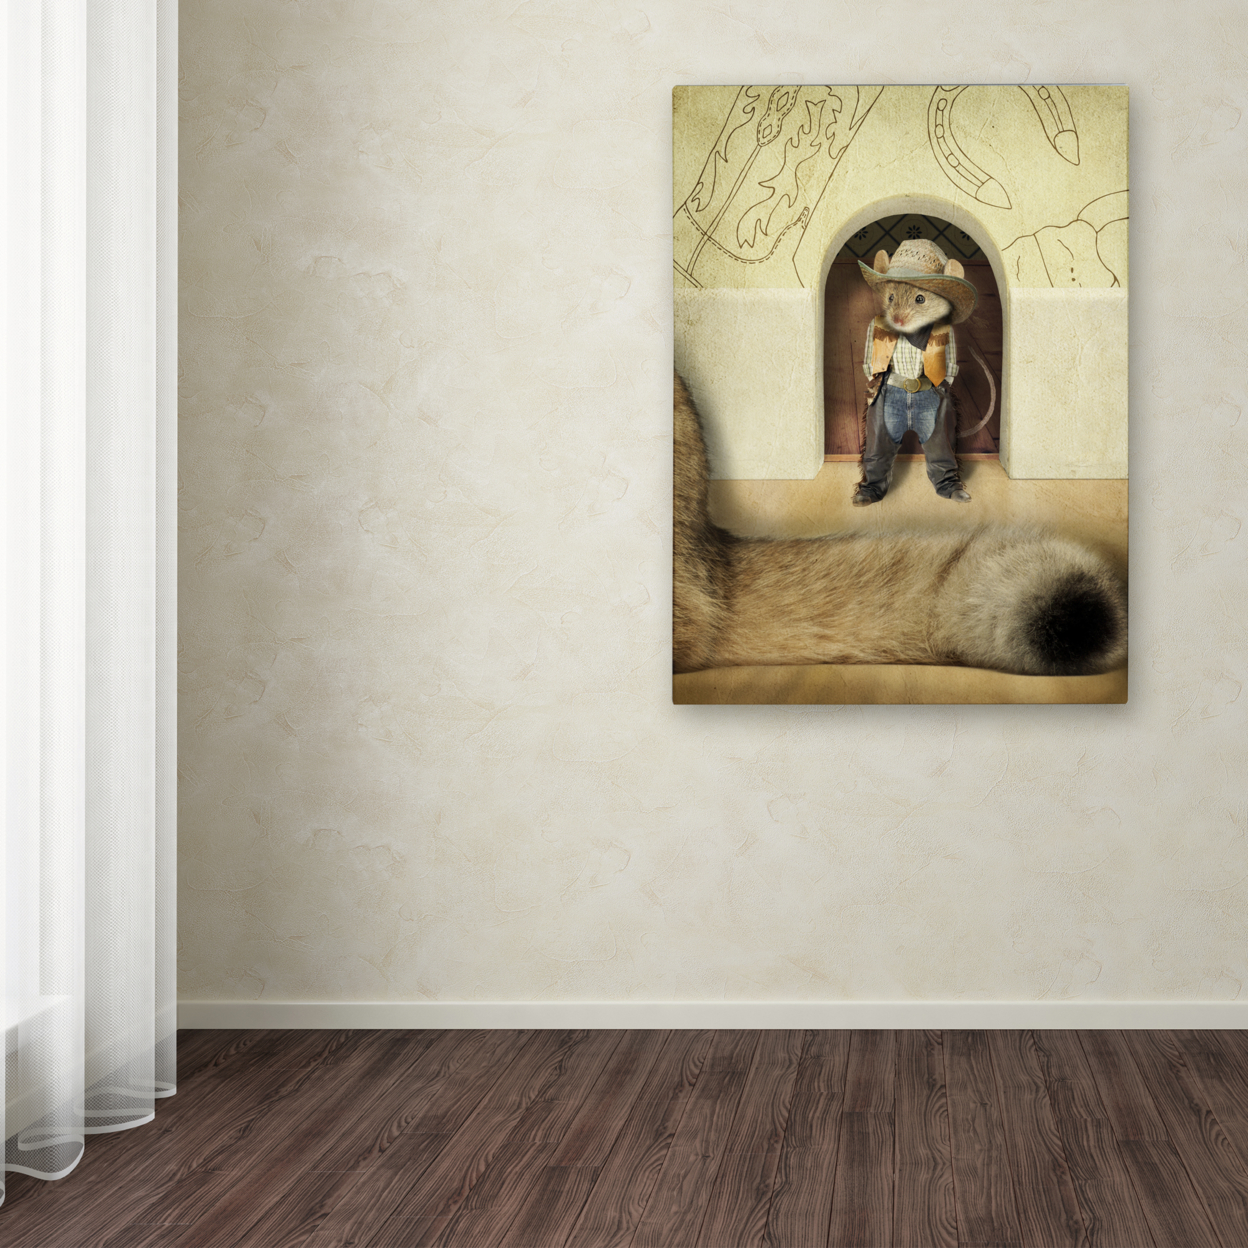 J Hovenstine Studios 'New Mouse In Town' Canvas Wall Art 35 X 47 Inches